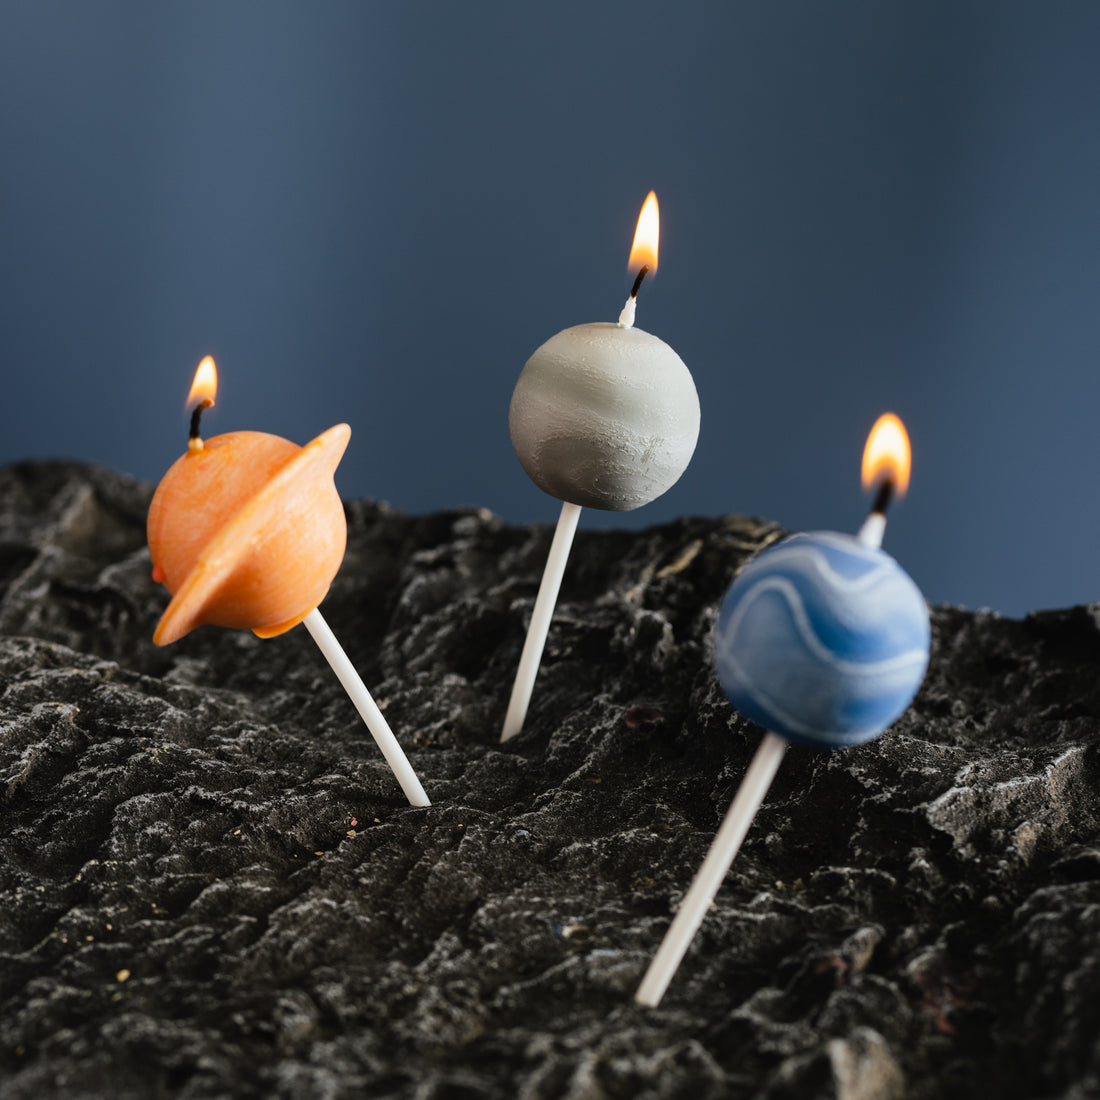 Three beautiful planet toppers from Southlake Gifts.